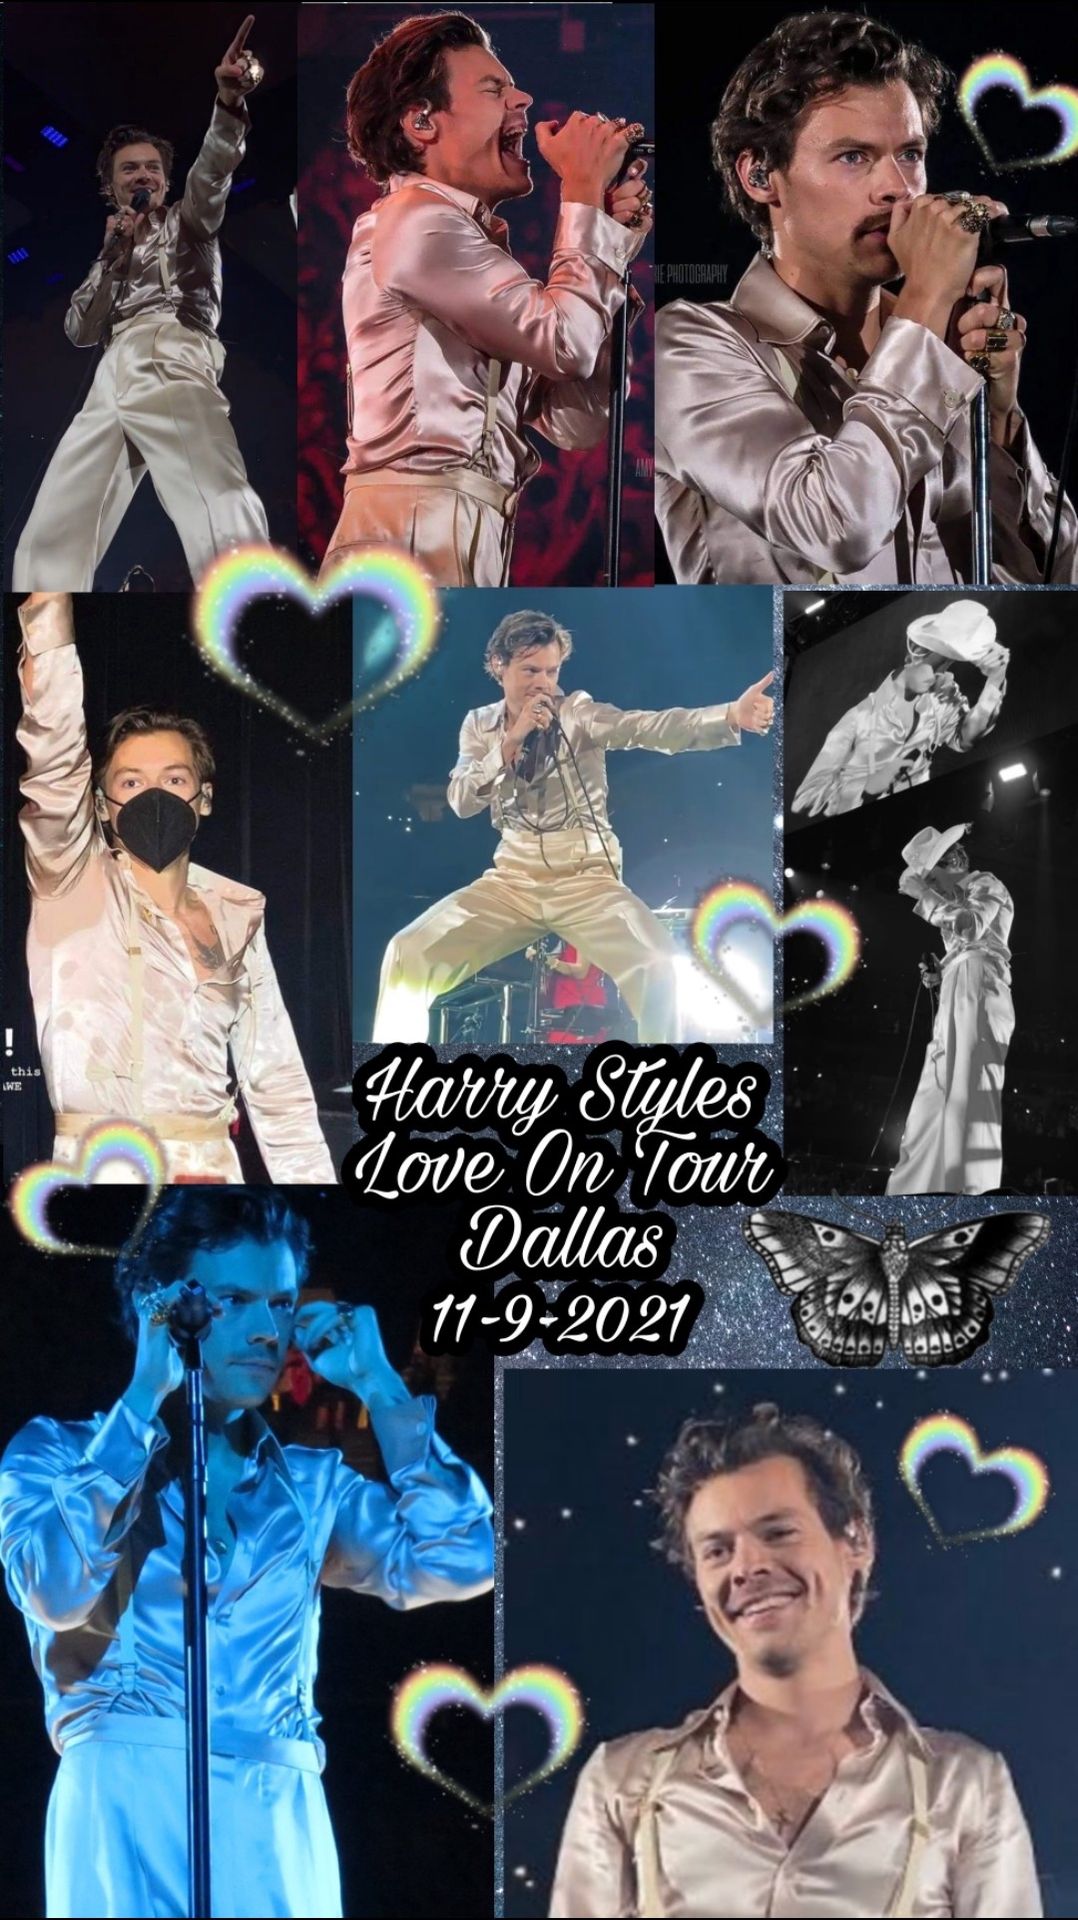 Harry Styles Wallpaper And Collages on tour